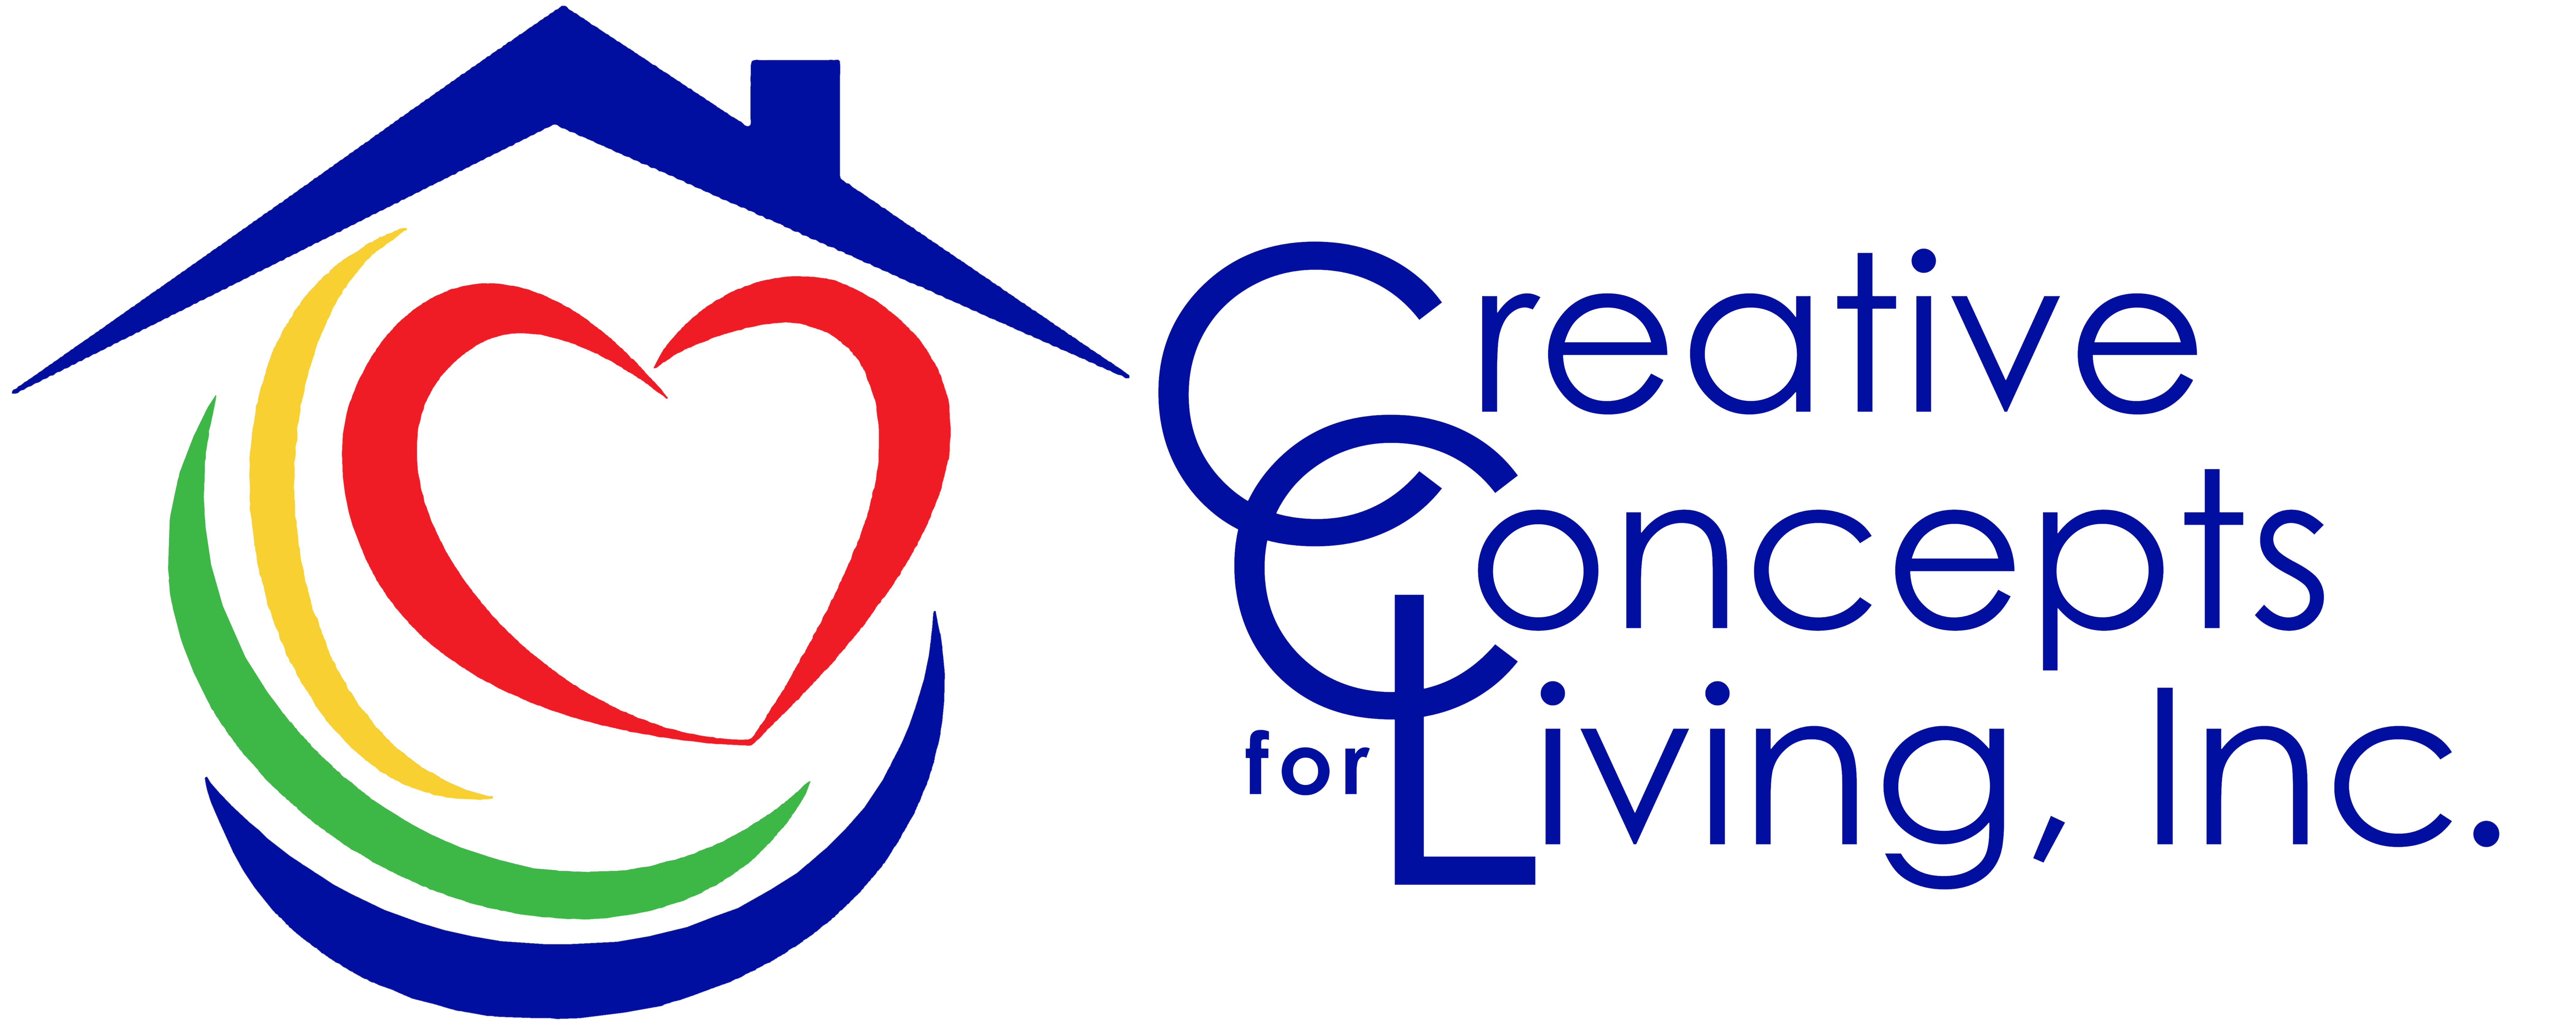 Creative Concepts for Living